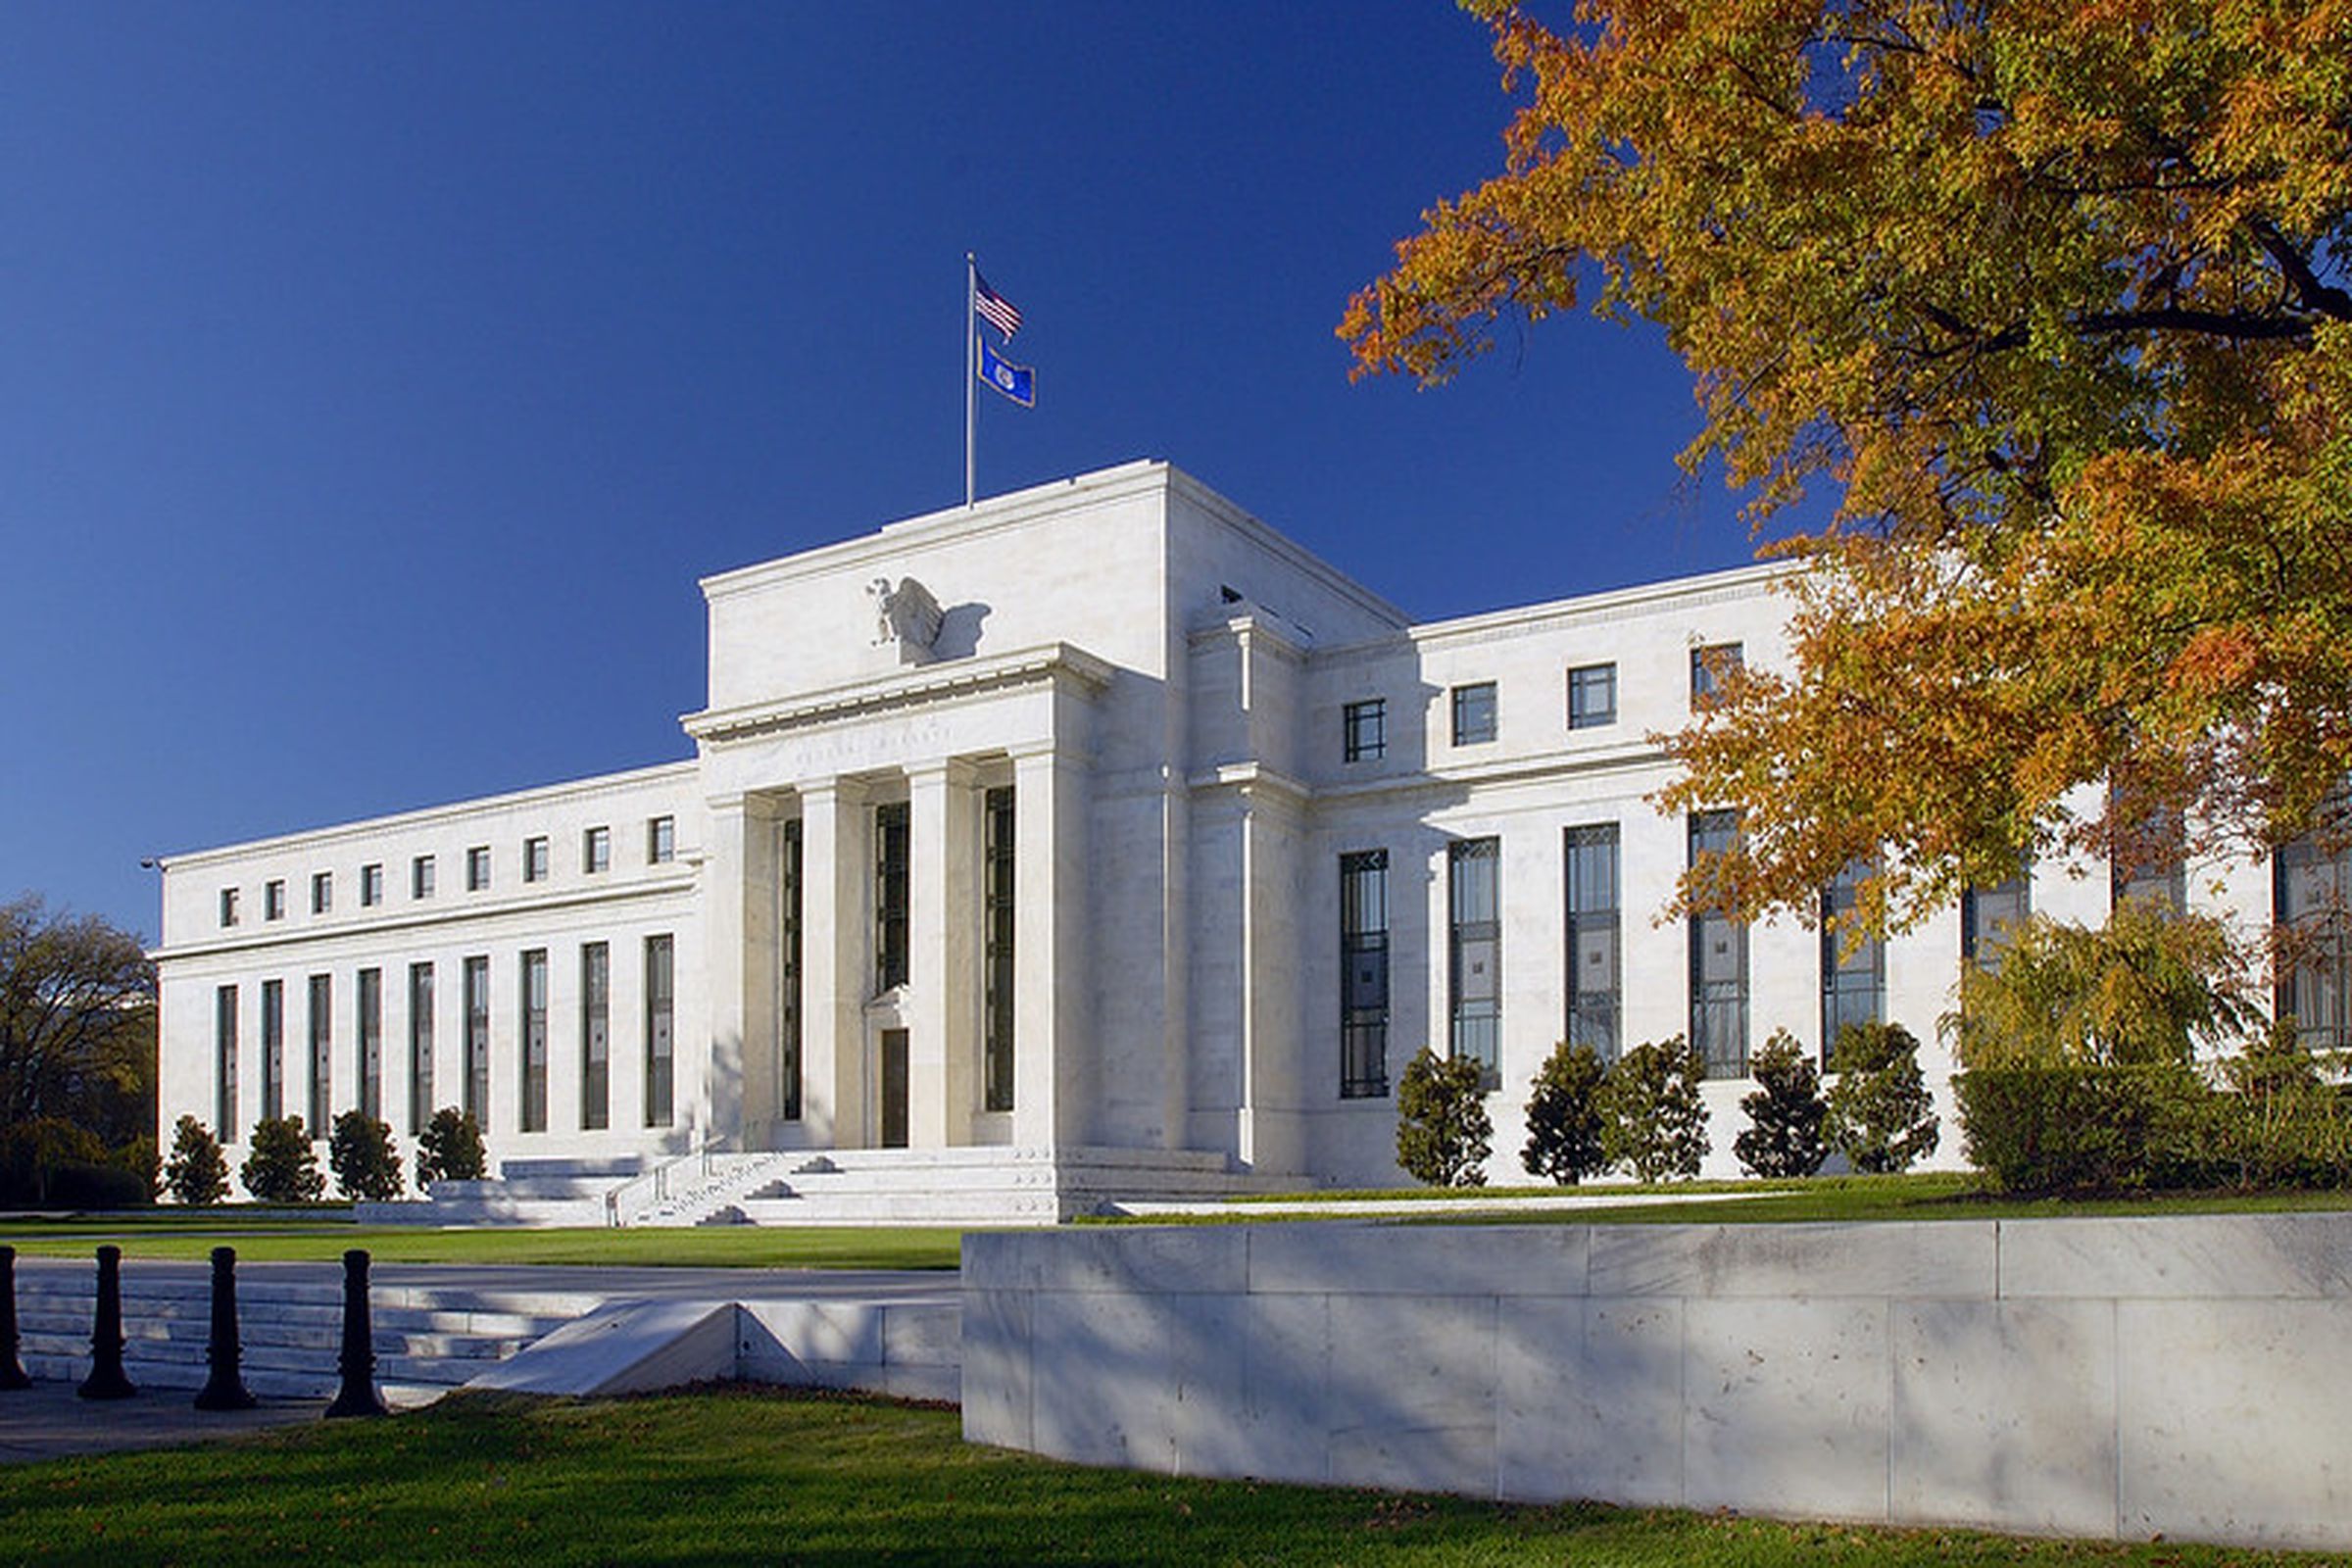 A photo showing the Federal Reserve building